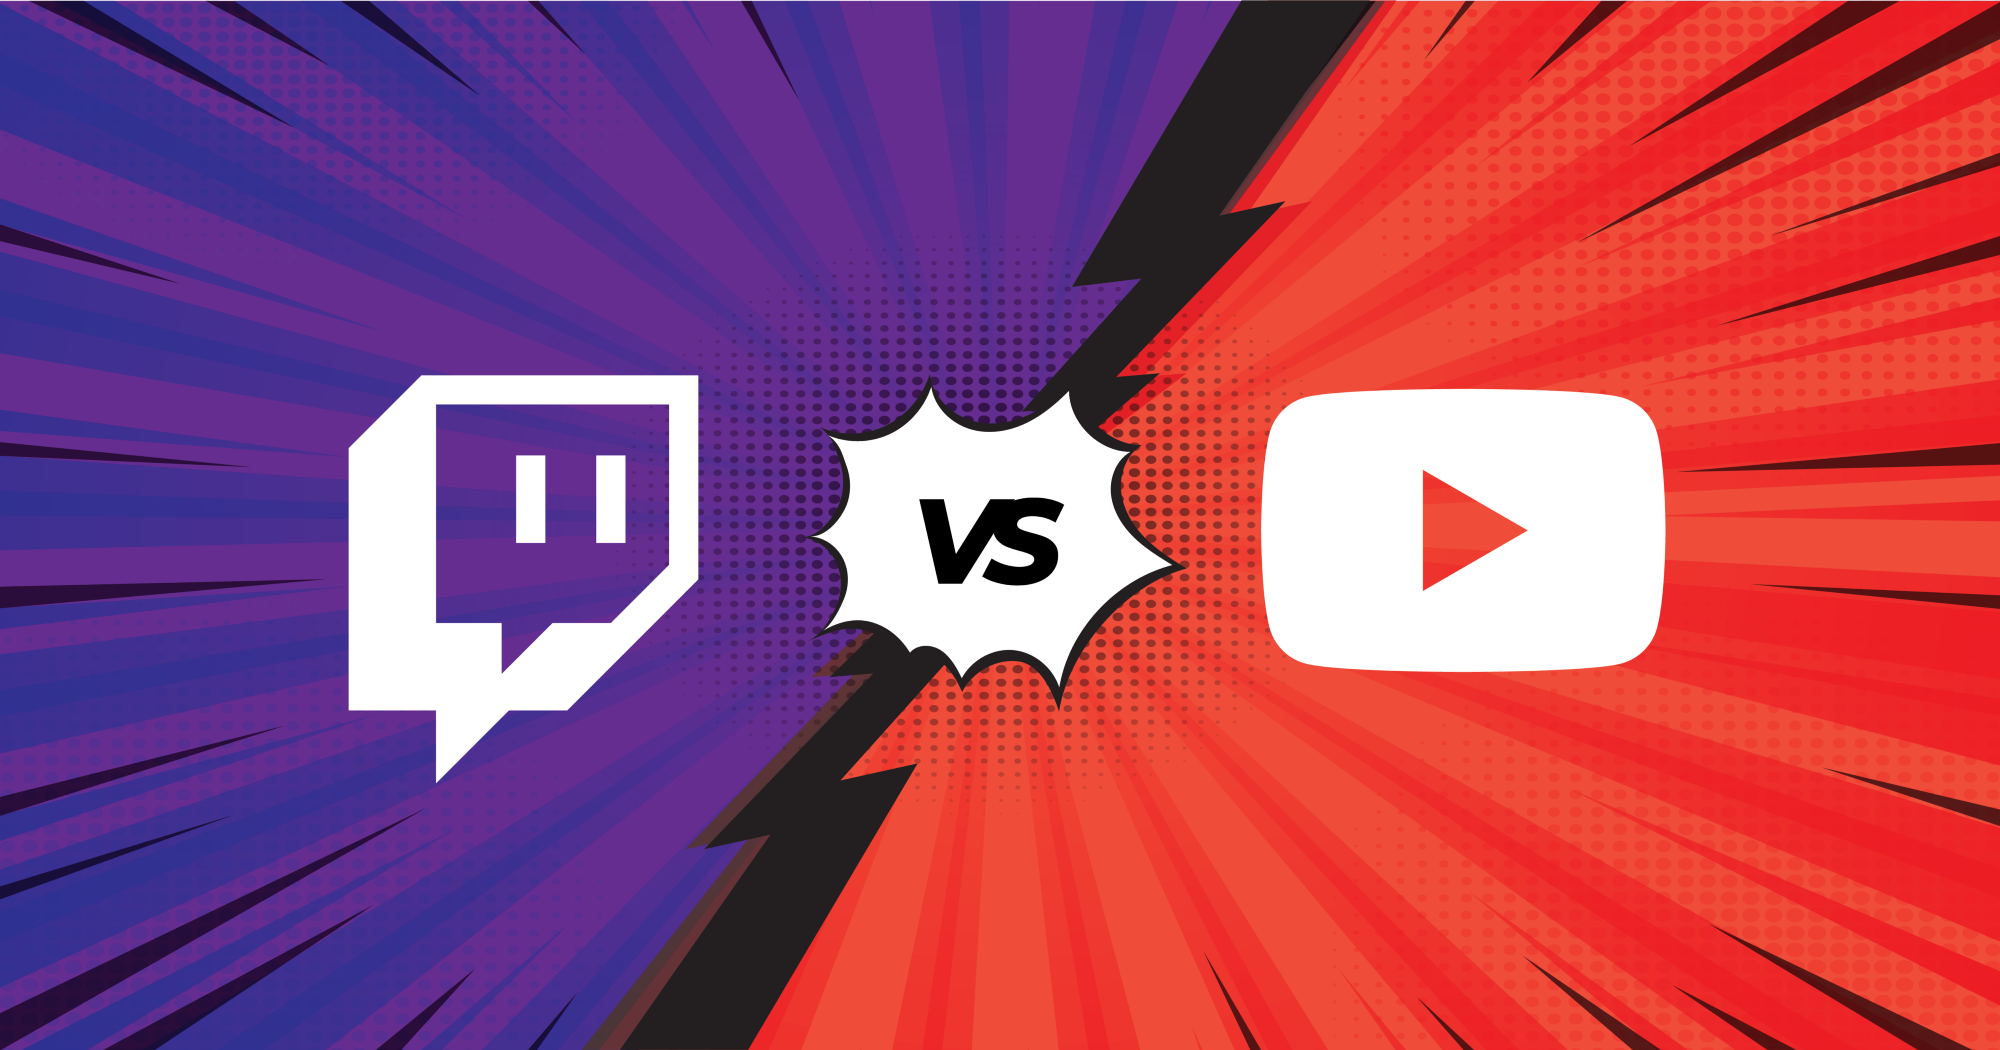 YouTube vs Twitch live streaming: which is best?